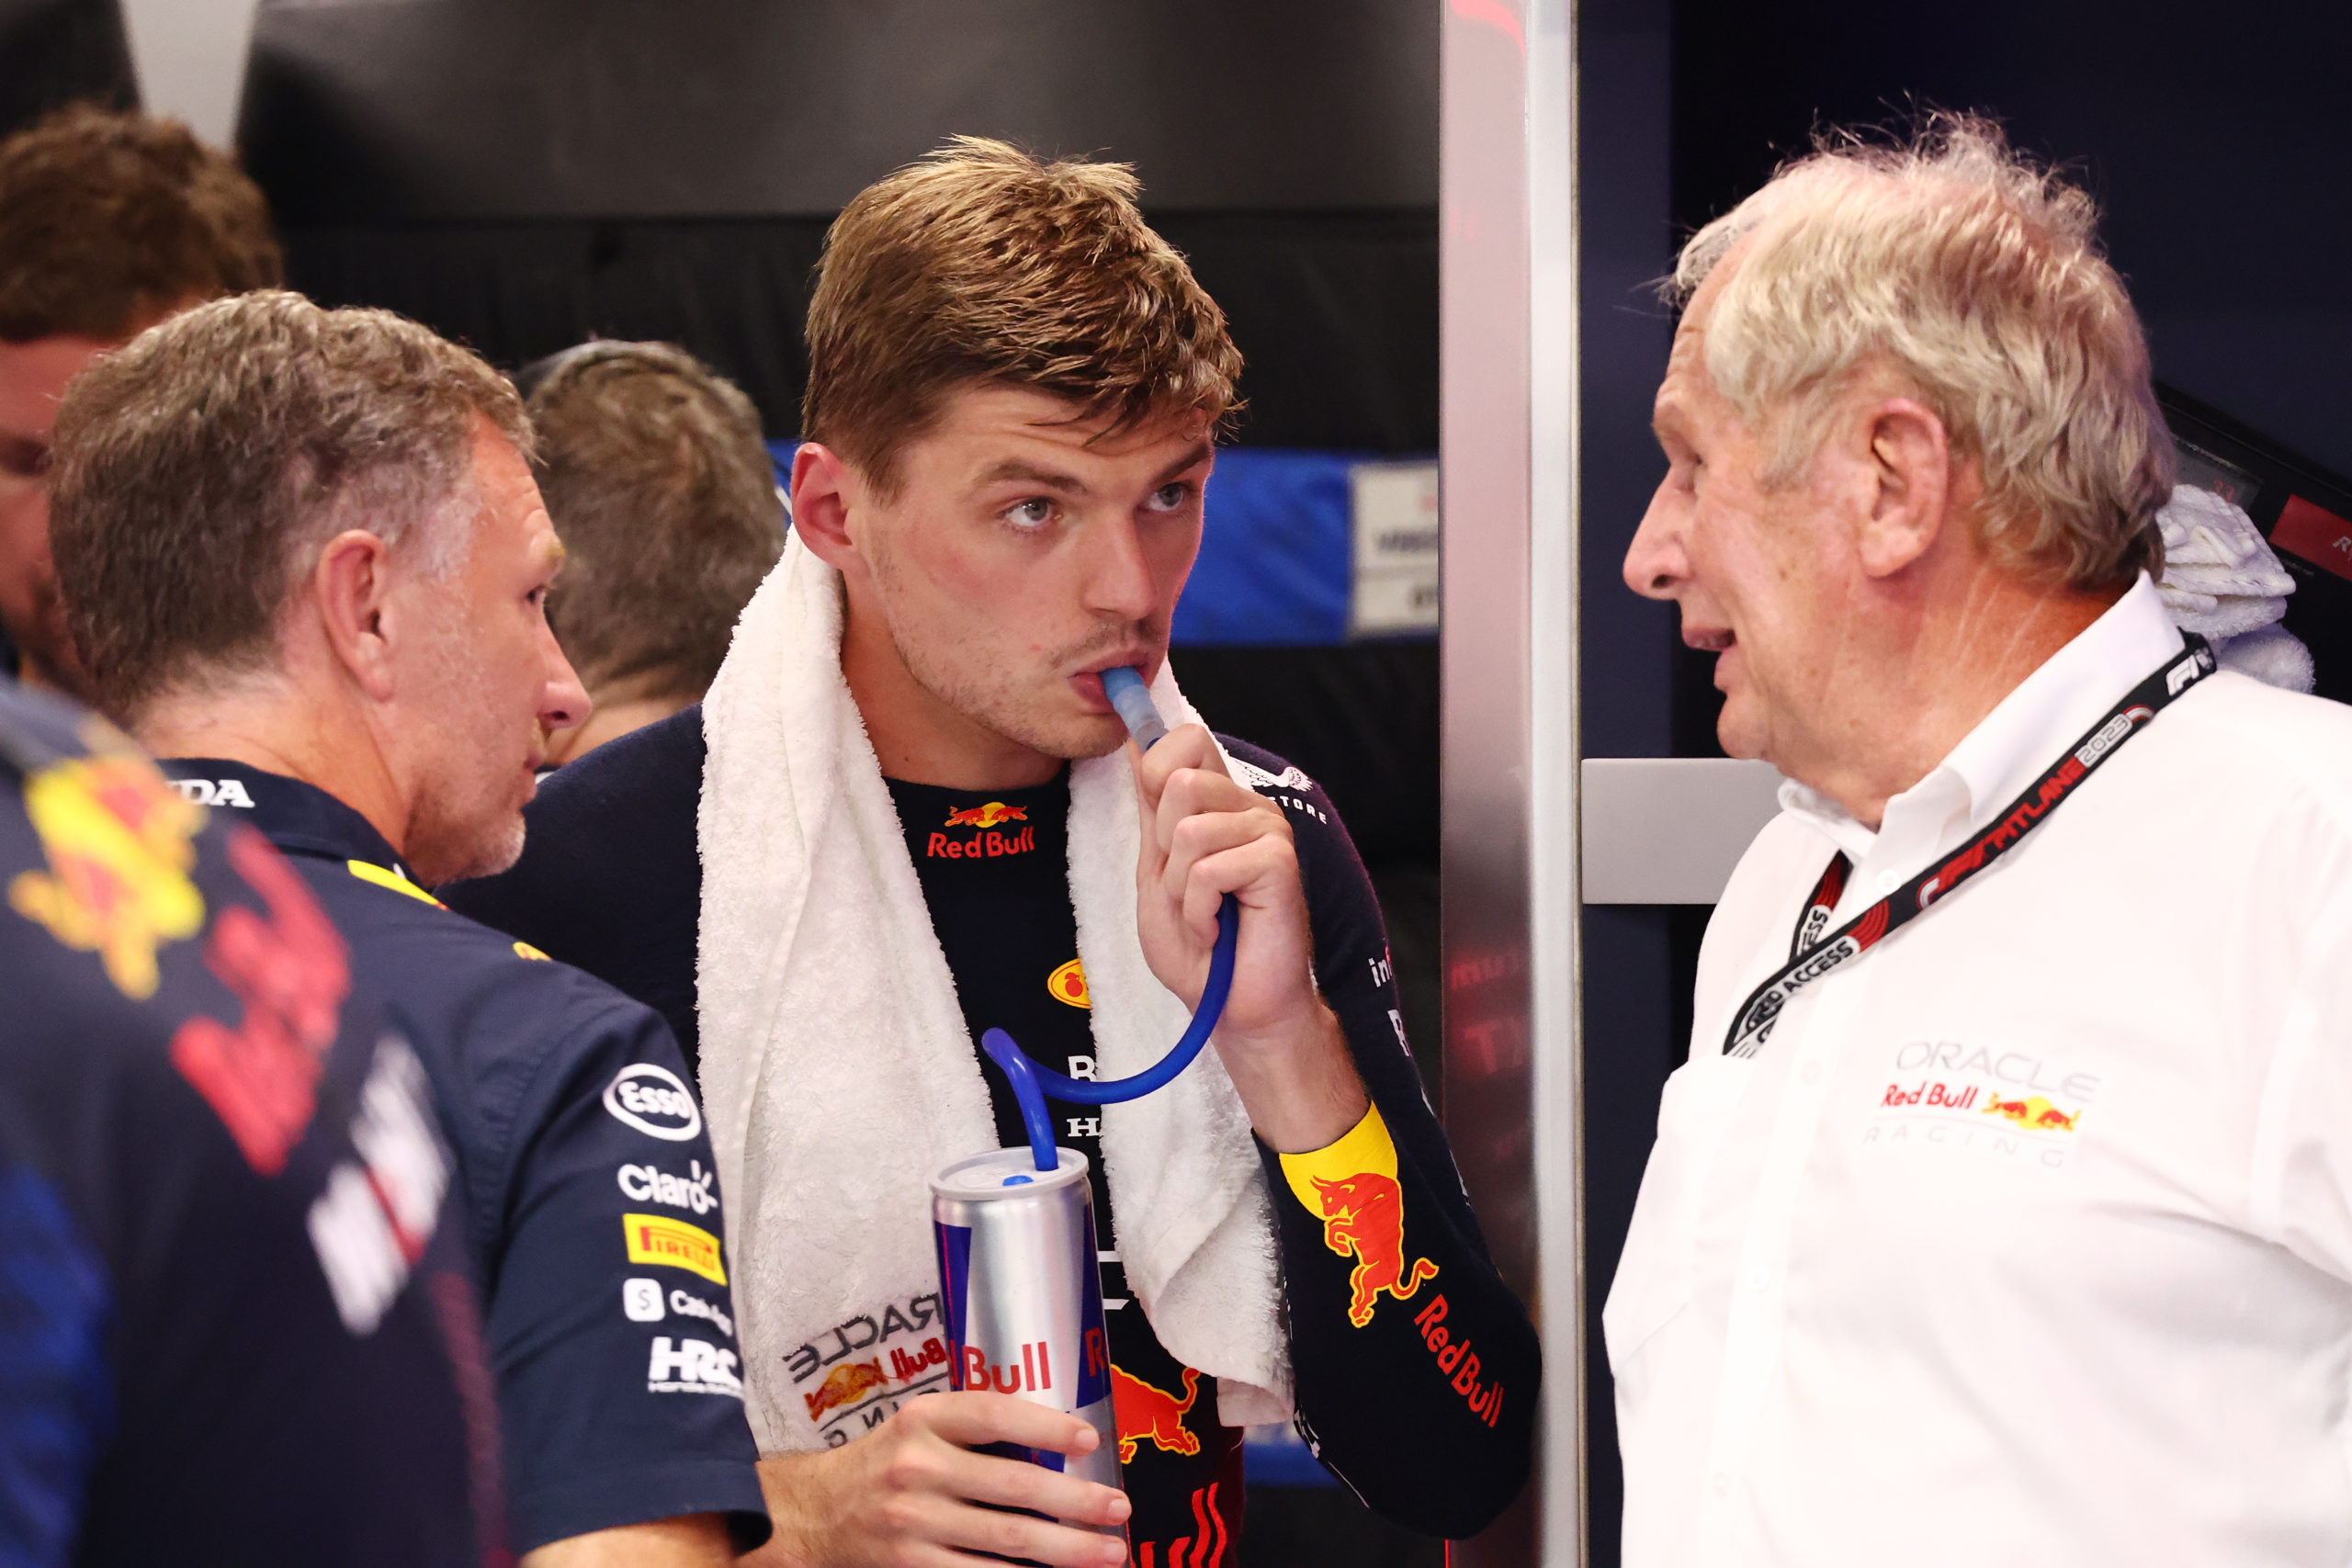 verstappen faces two investigations after nightmare f1 qualifying